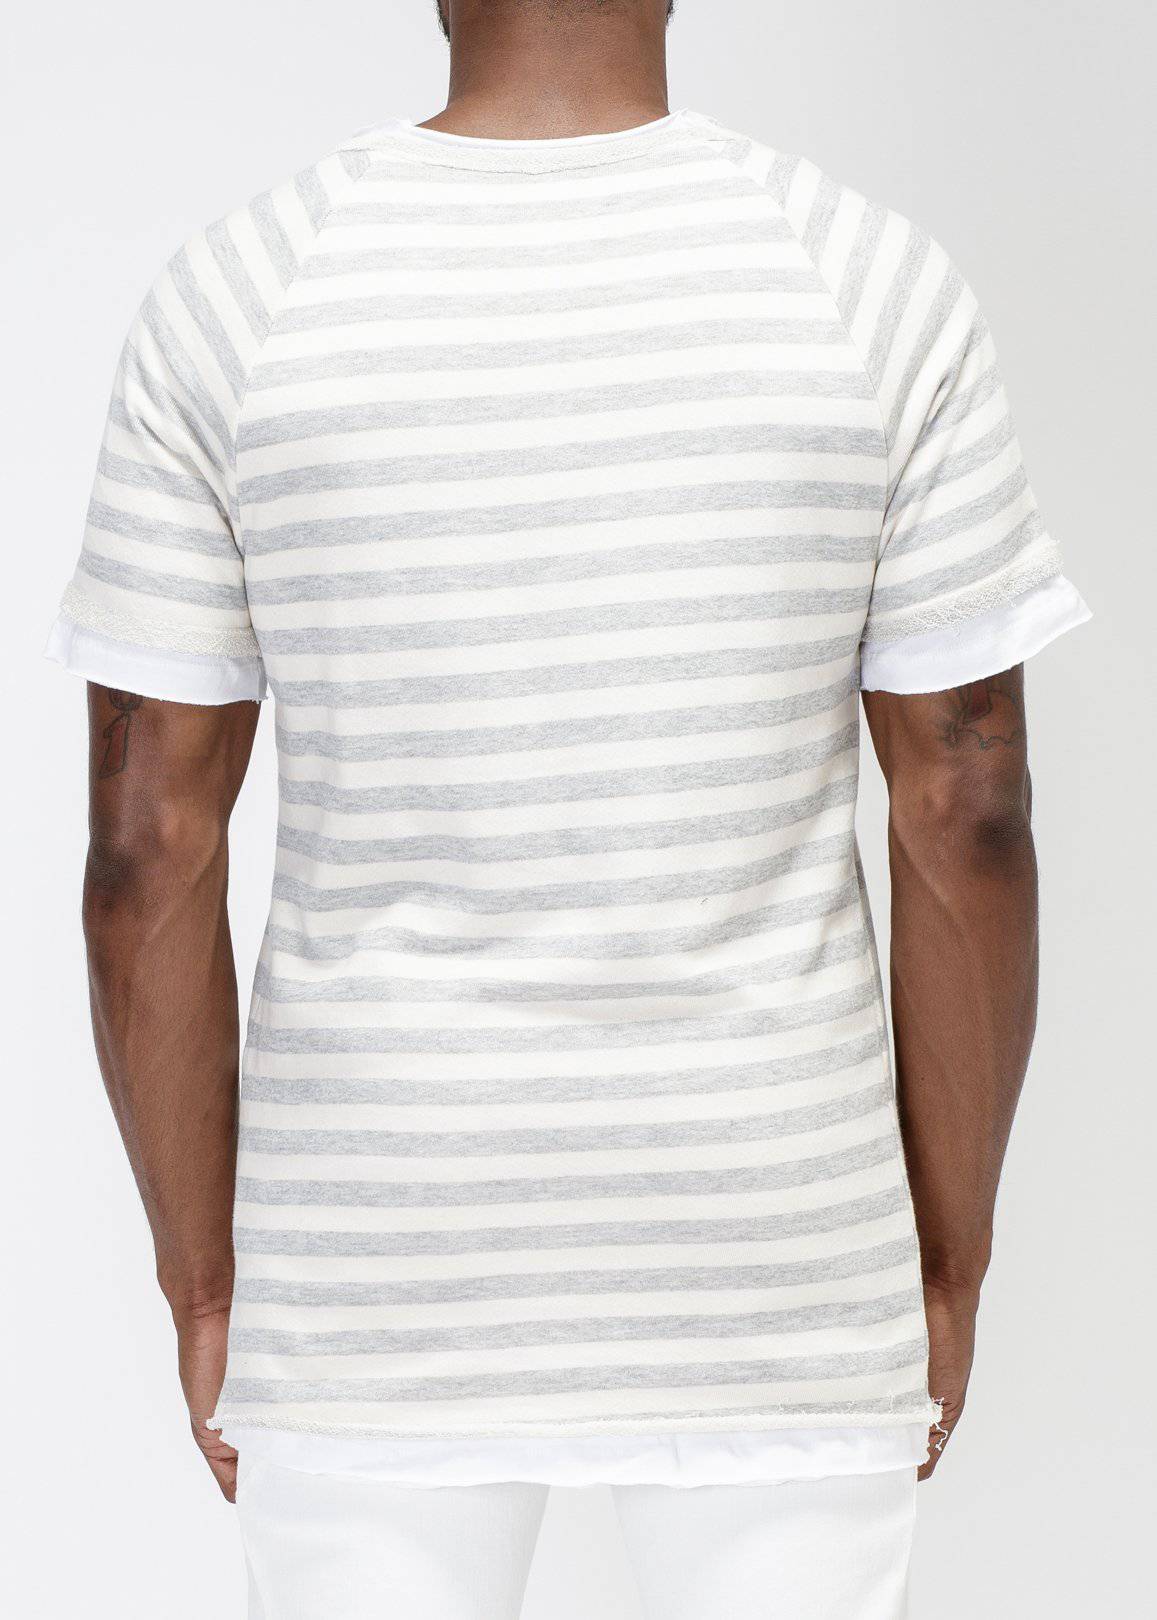 Konus Men's Layered SS French Terry Tee in Natural Stripe by Shop at Konus